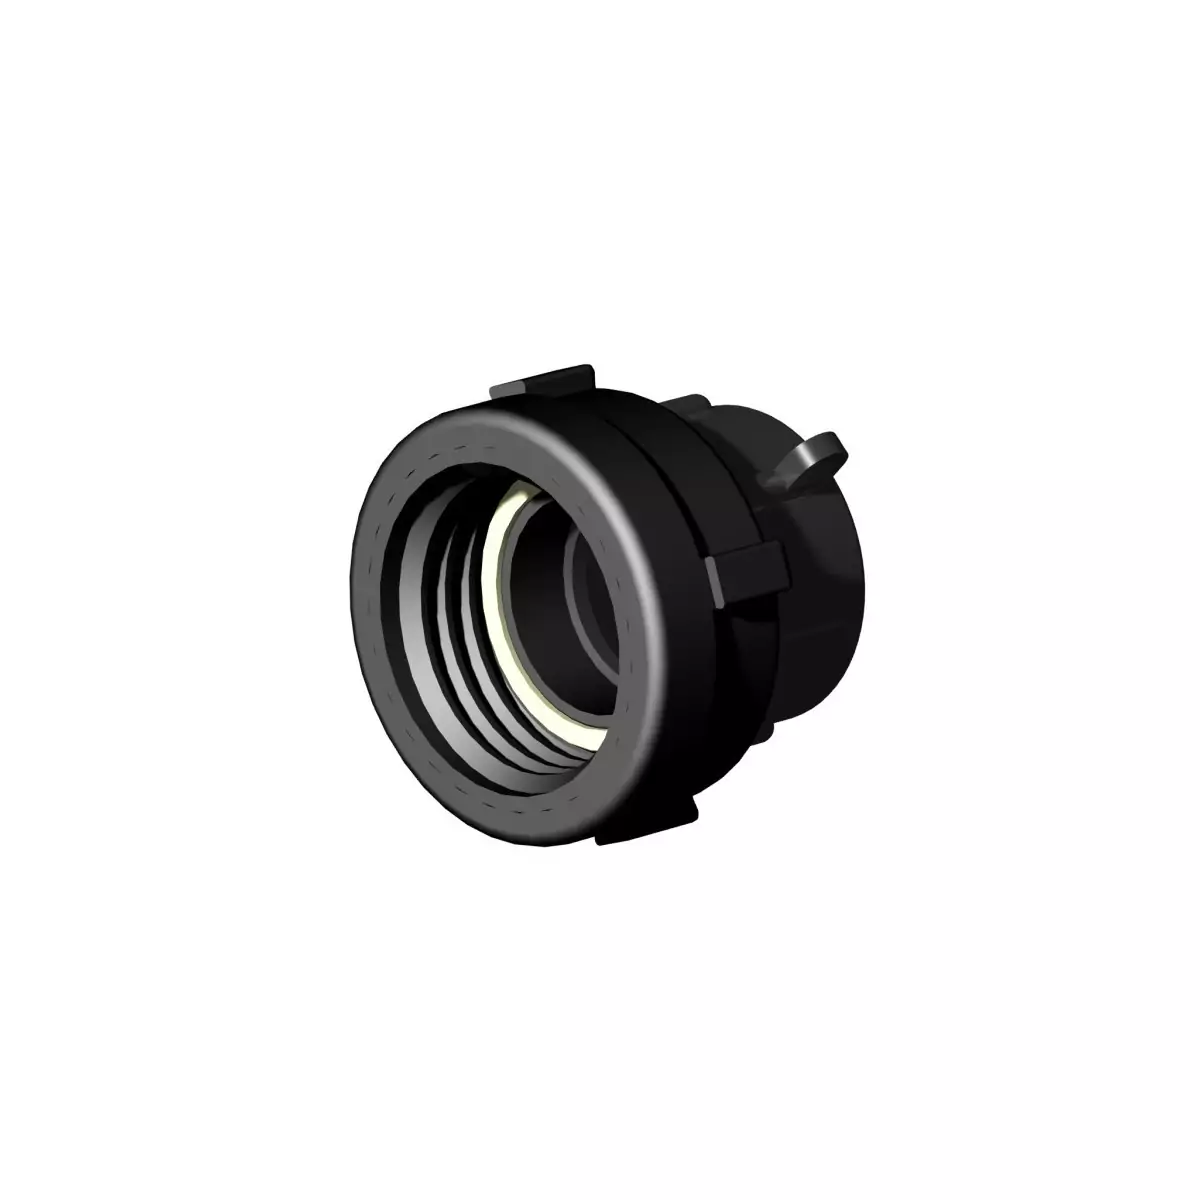 Product sheet Female connector S60x6 2 "- female thread 1-1 / 2"